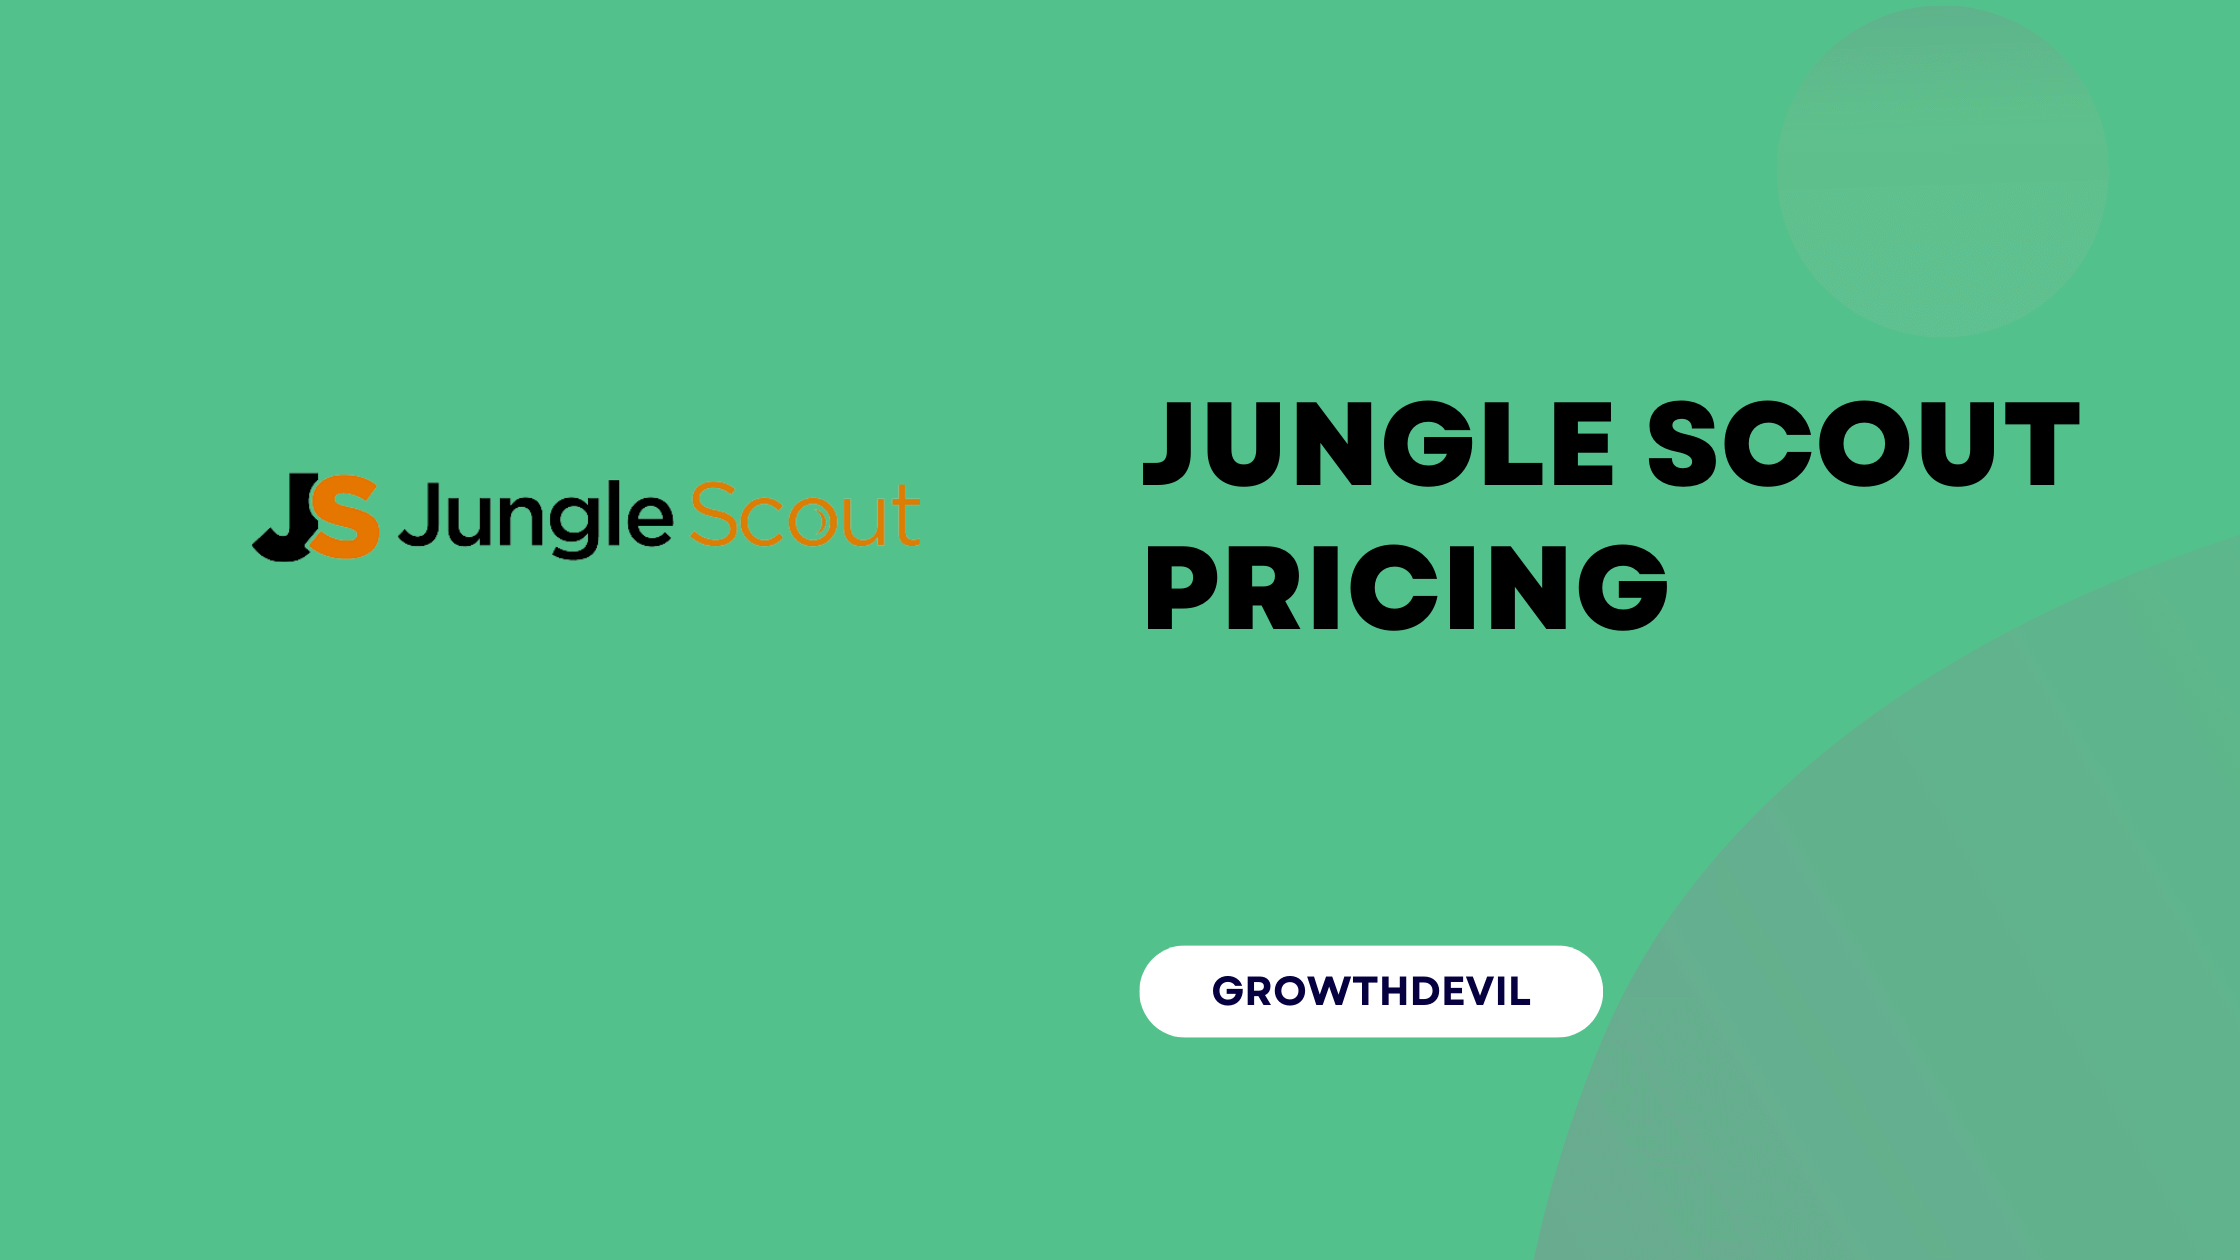 Jungle Scout Pricing - GrowthDevil